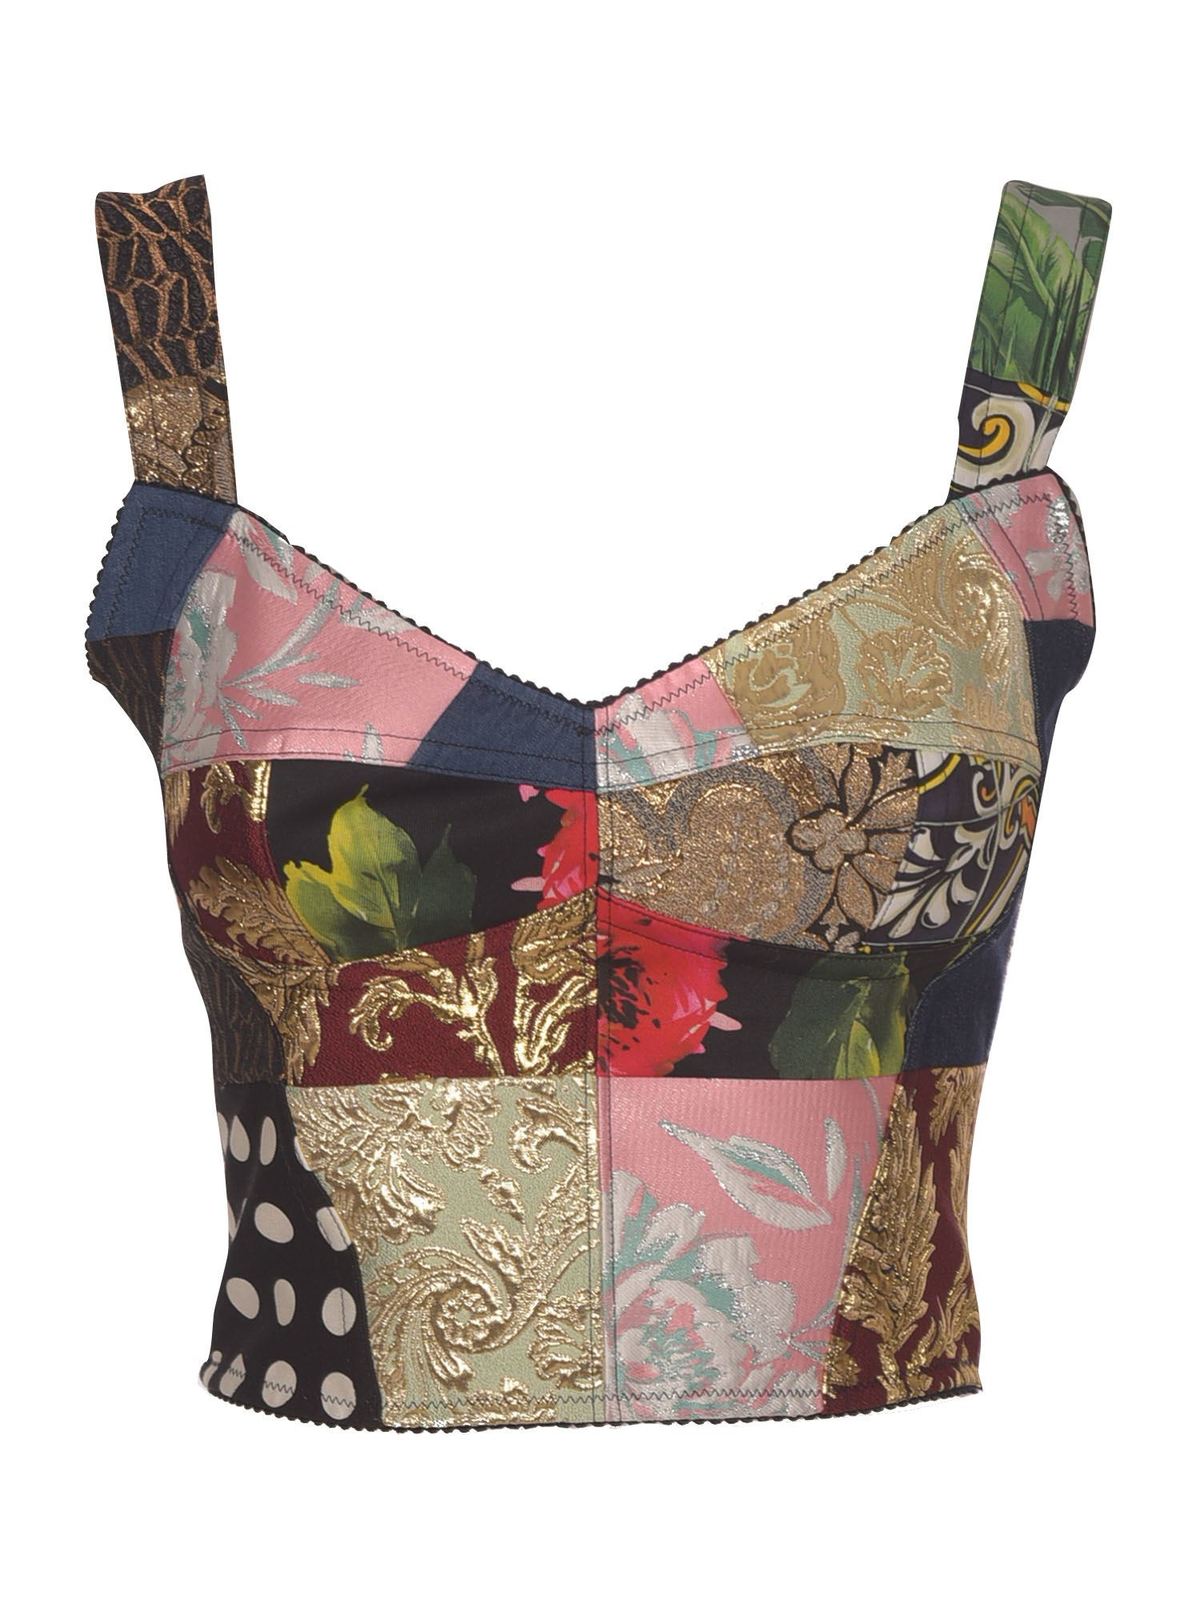 DOLCE & GABBANA PATCHWORK BUSTIER TOP IN MULTICOLOR